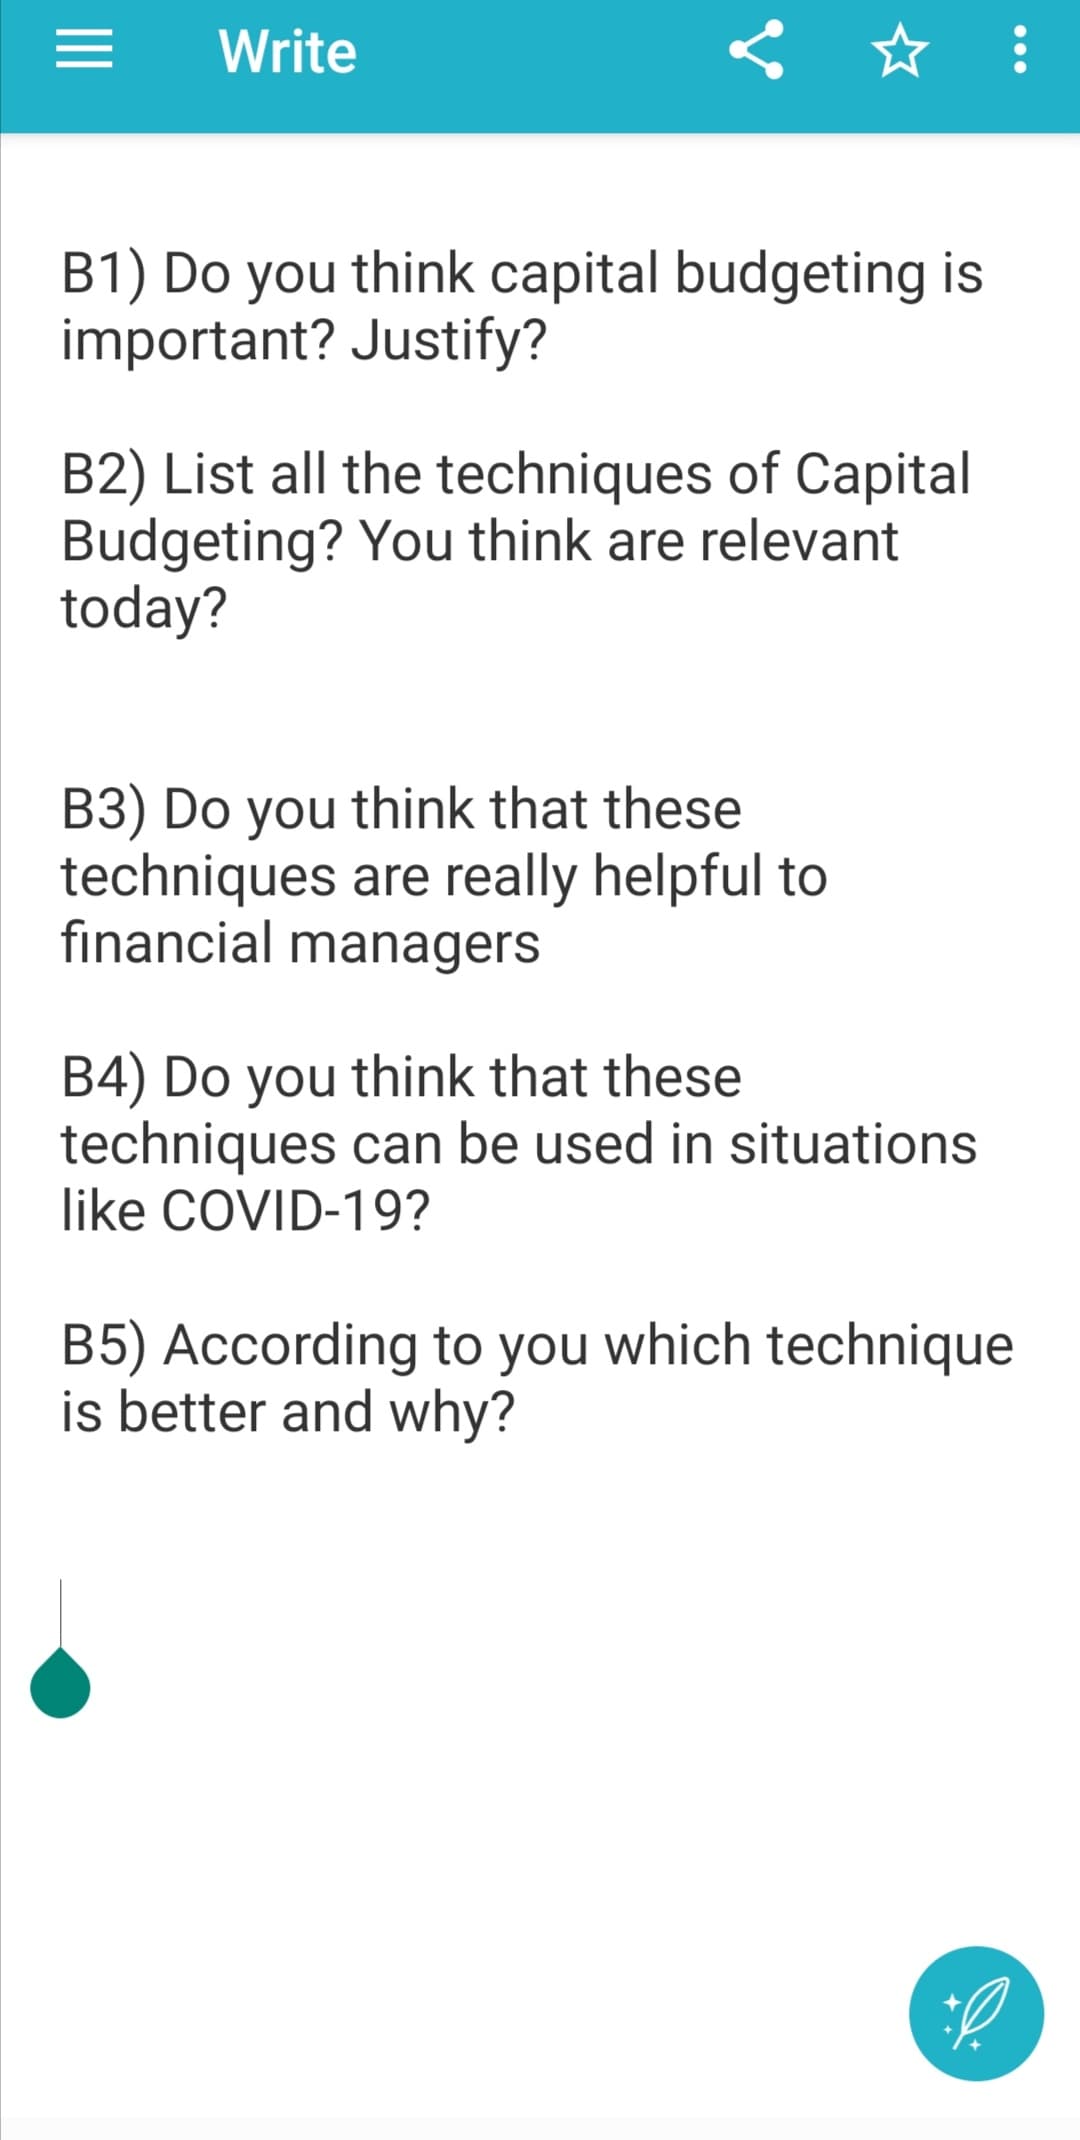 Write
B1) Do you think capital budgeting is
important? Justify?
B2) List all the techniques of Capital
Budgeting? You think are relevant
today?
B3) Do you think that these
techniques are really helpful to
financial managers
B4) Do you think that these
techniques can be used in situations
like COVID-19?
B5) According to you which technique
is better and why?
